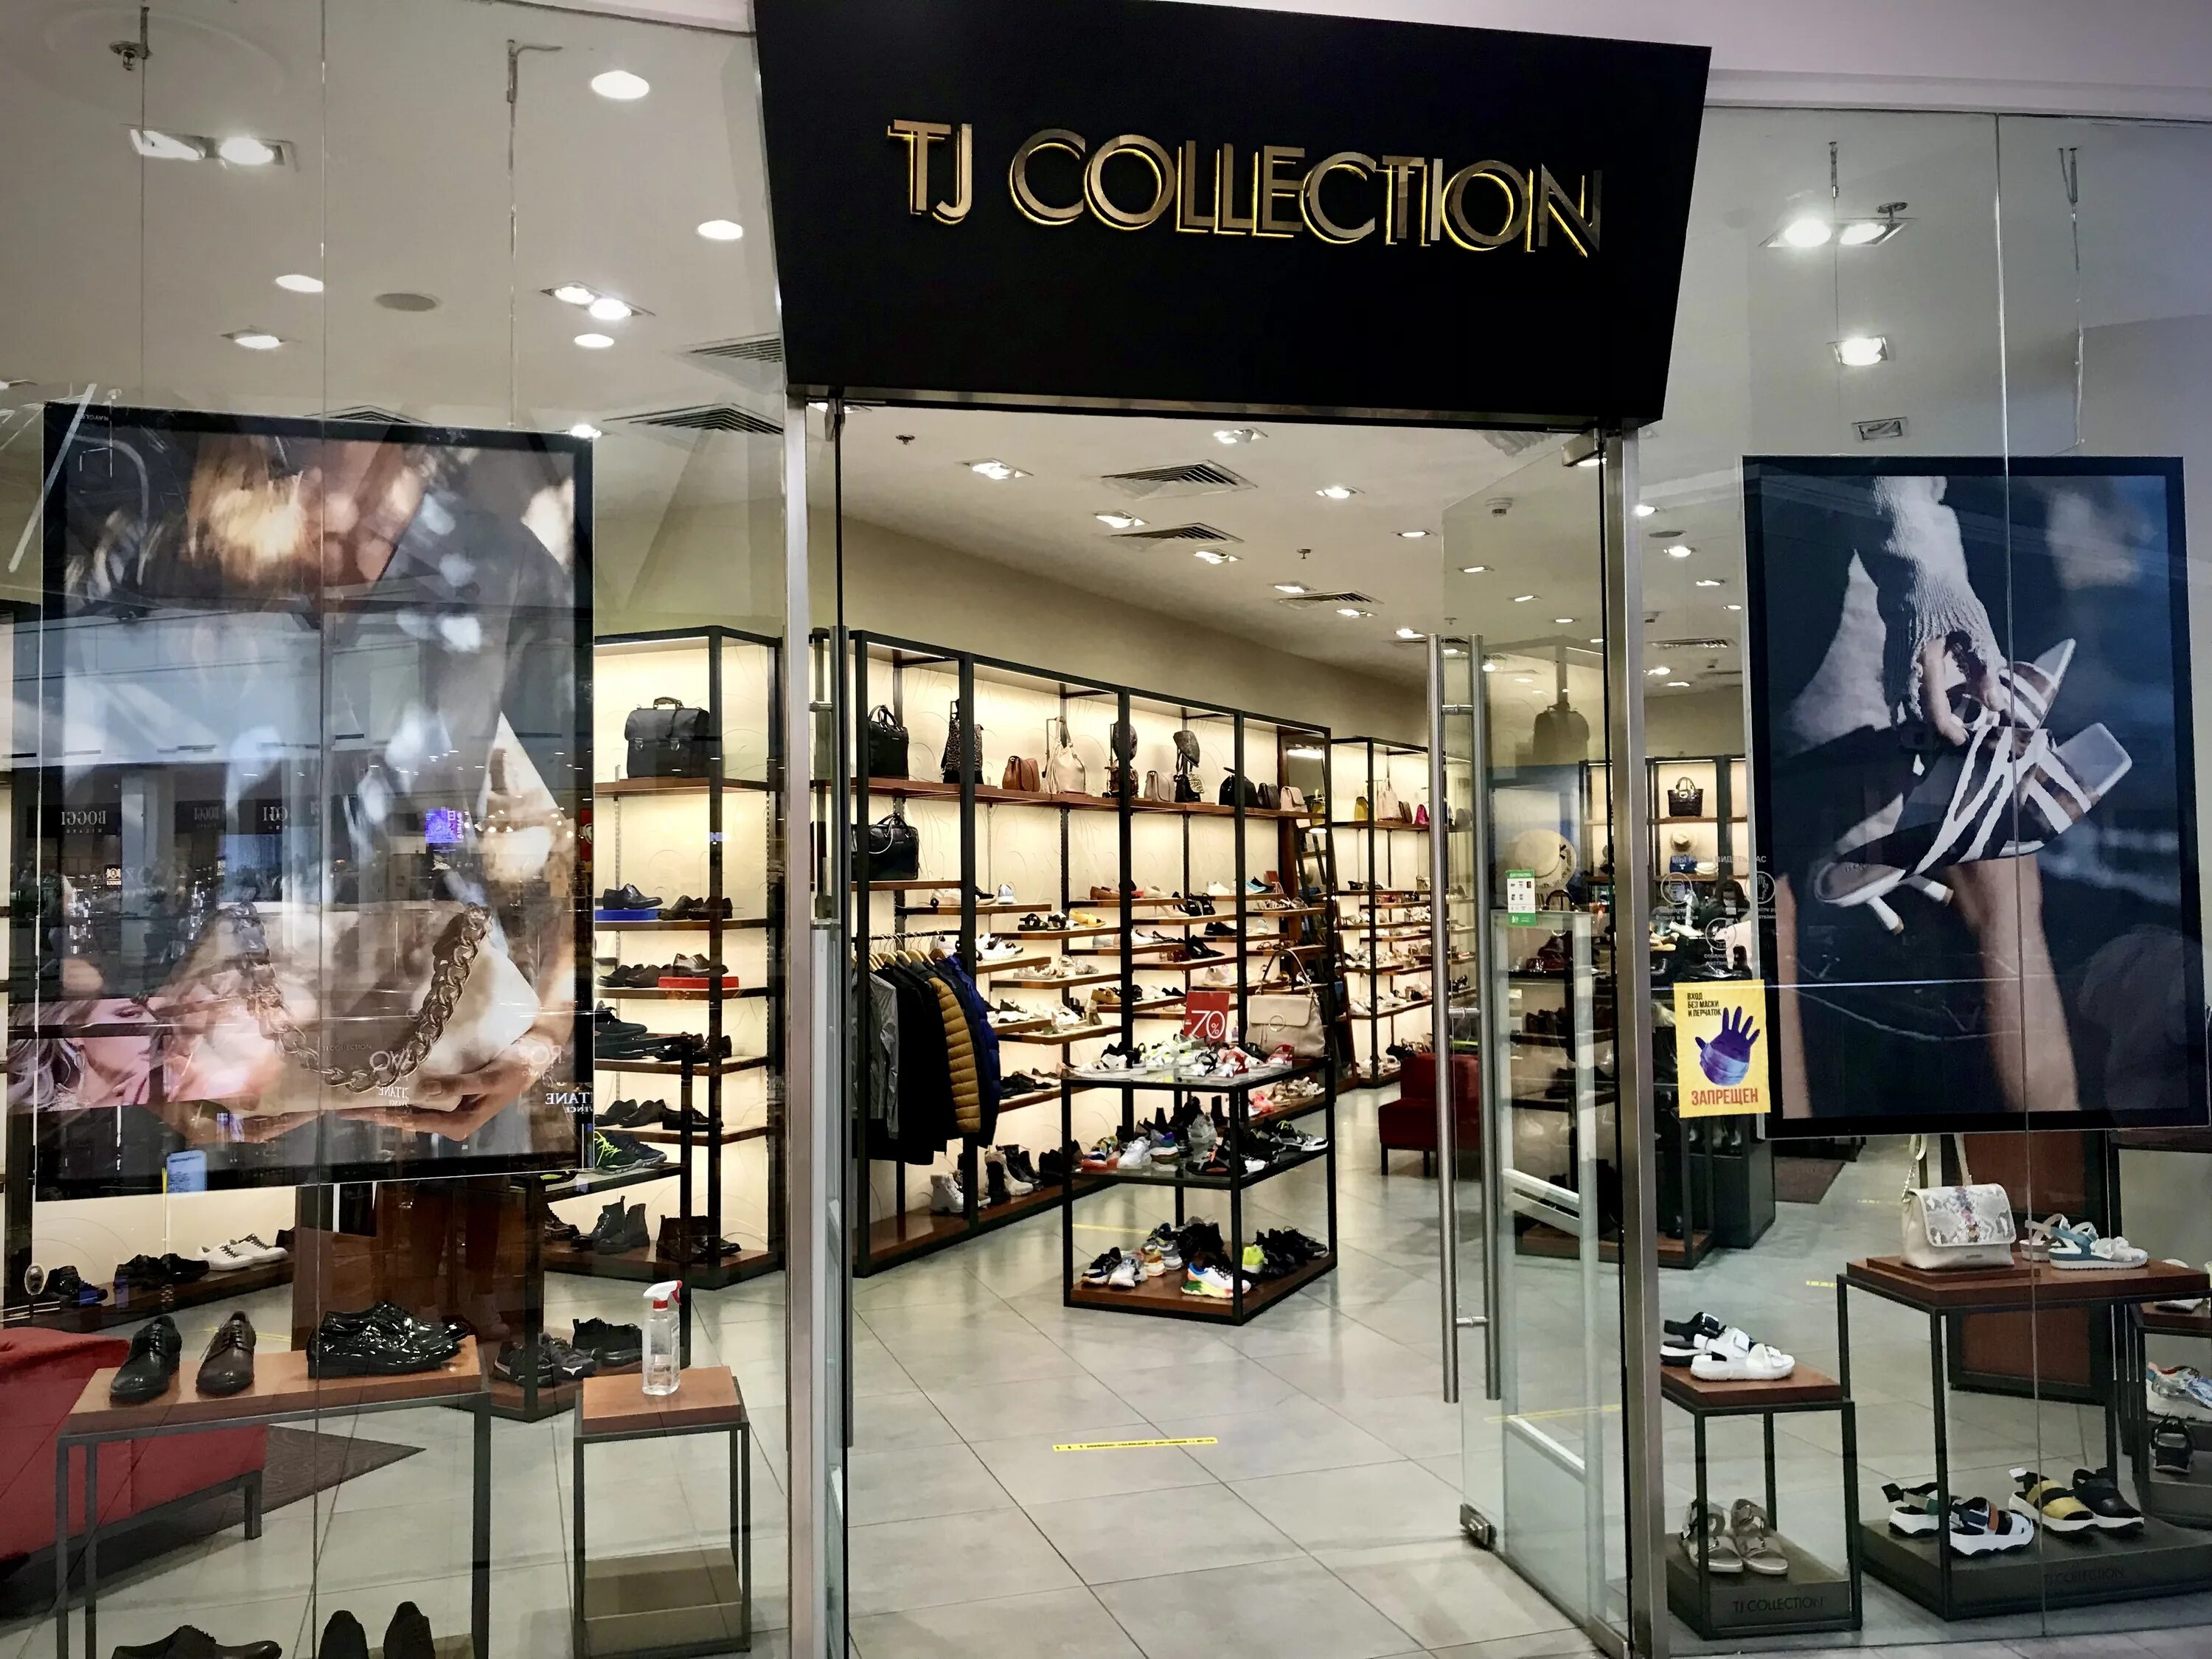 Tj collection москва. TJ collection магазин. TJ collection магазины в Москве. TJ collection бутик. Атриум TJ collection.